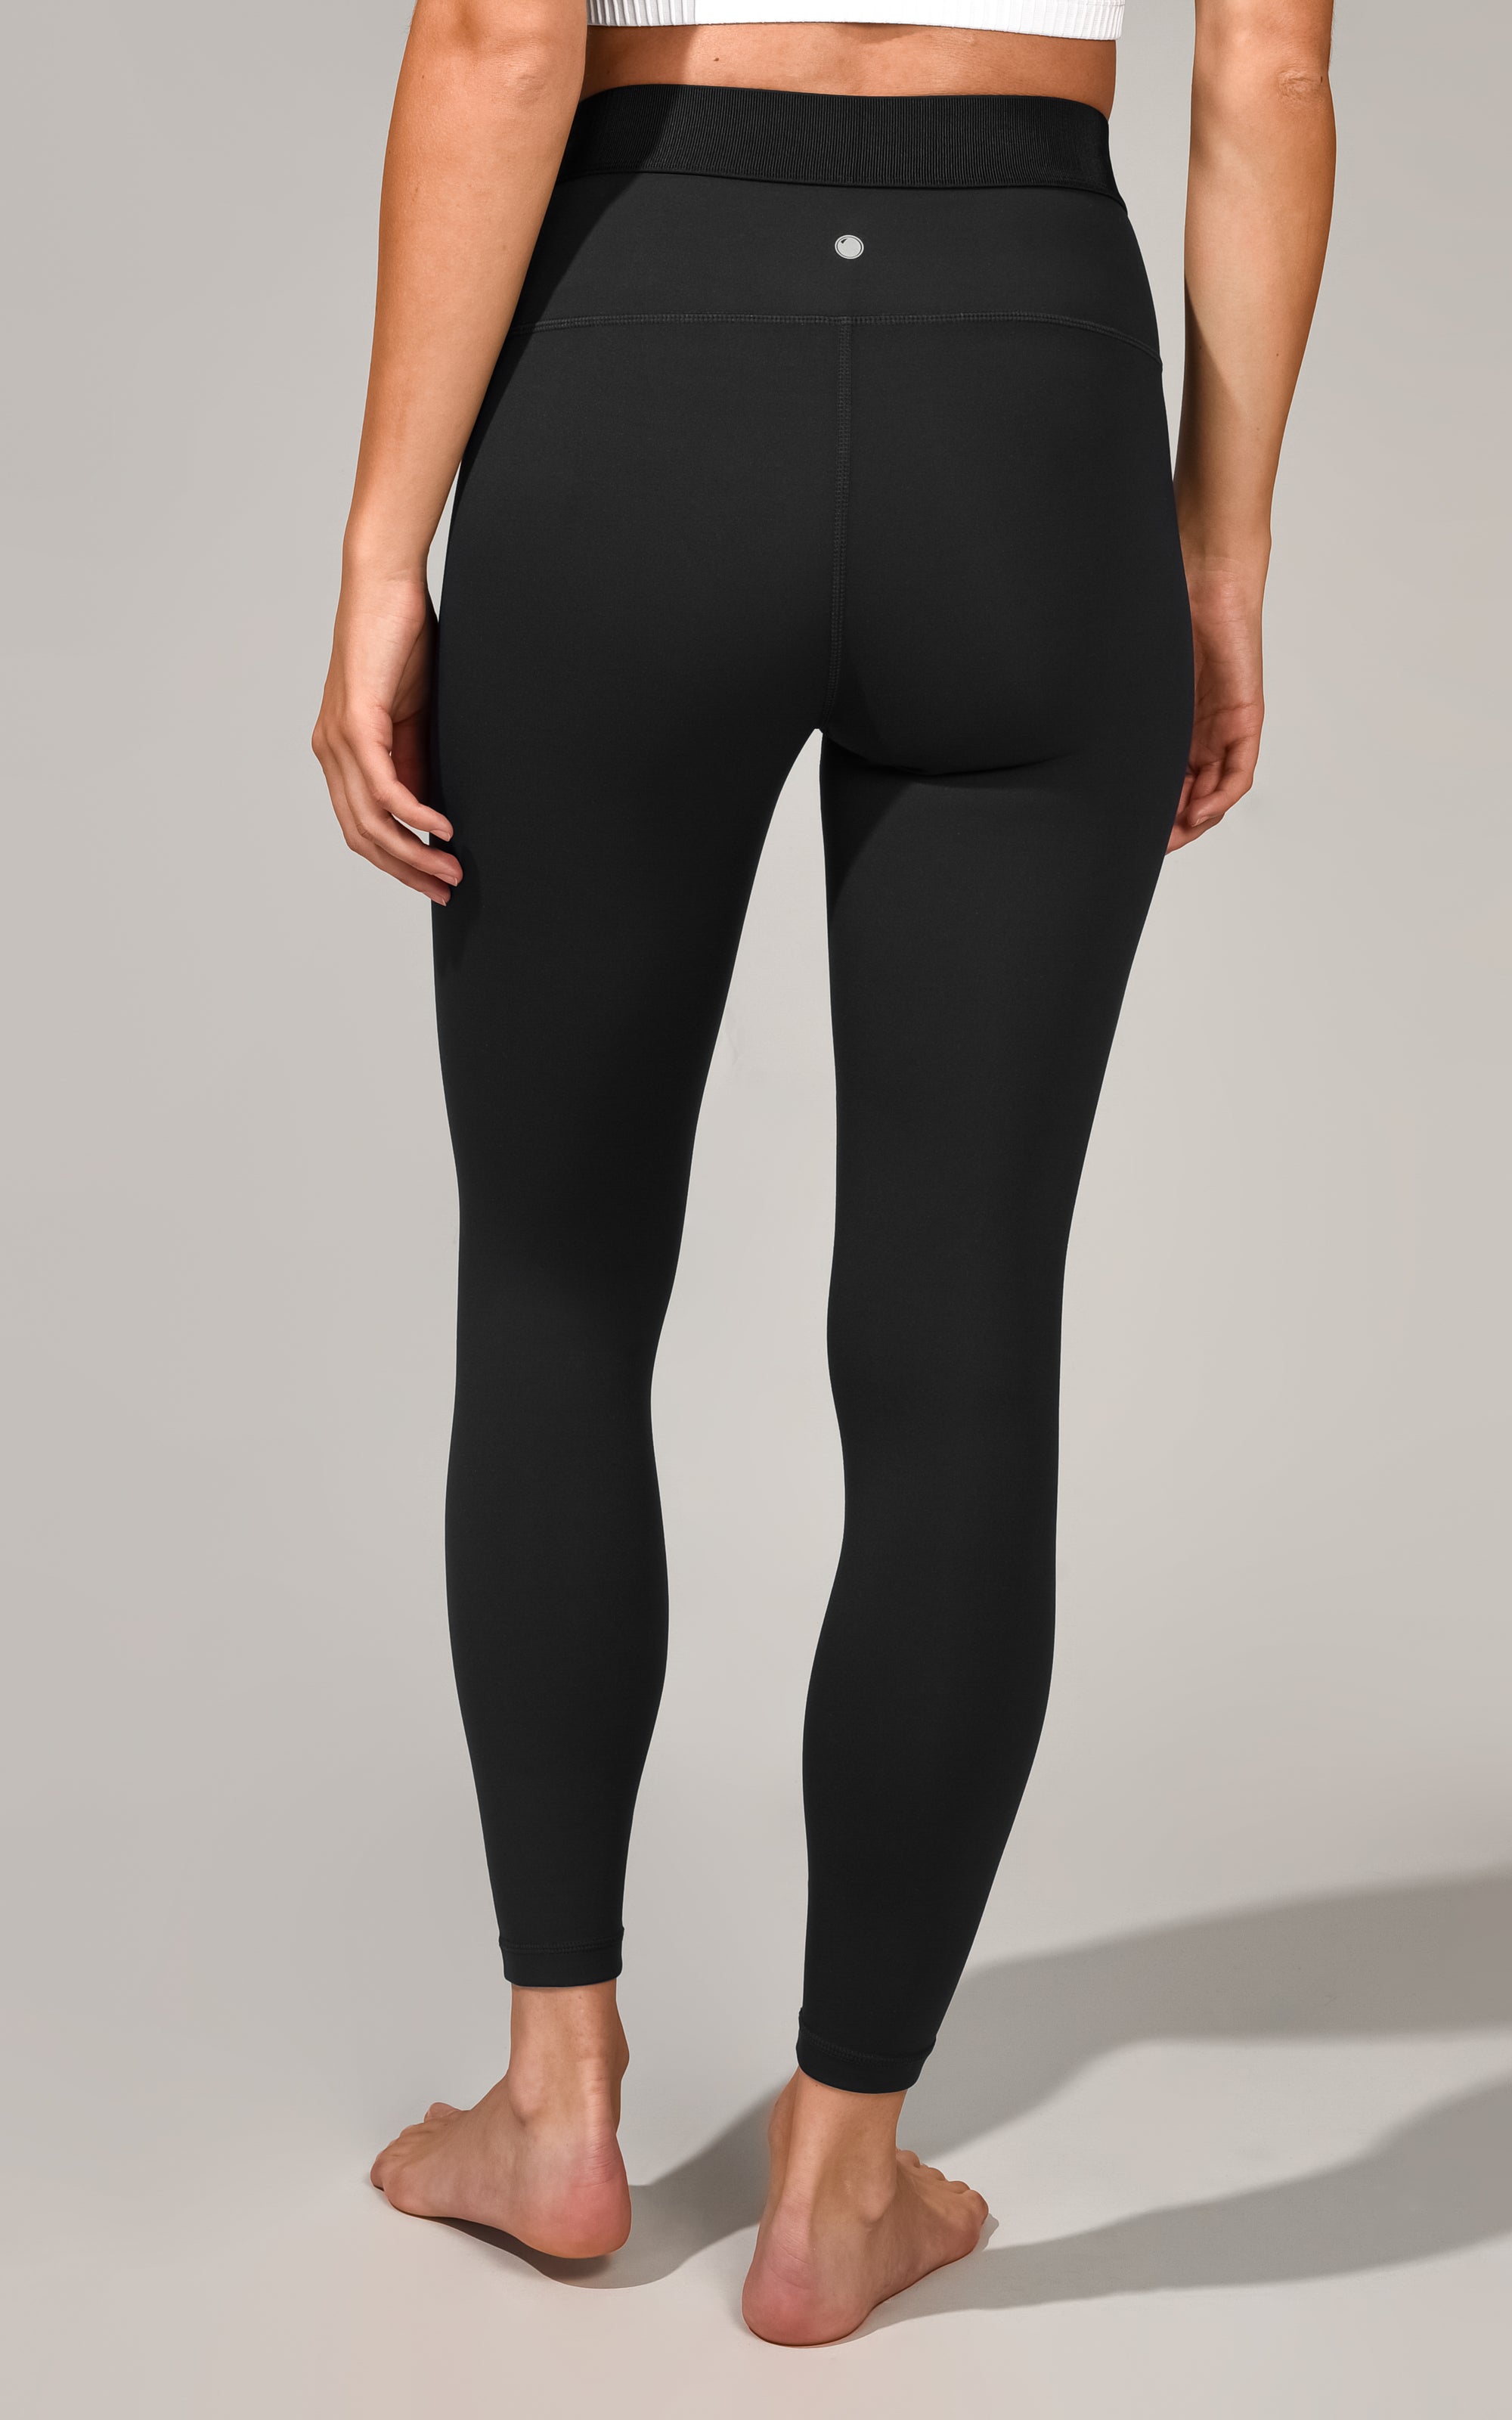 Yogalicious LUX leggings Blue - $8 - From Kimberly